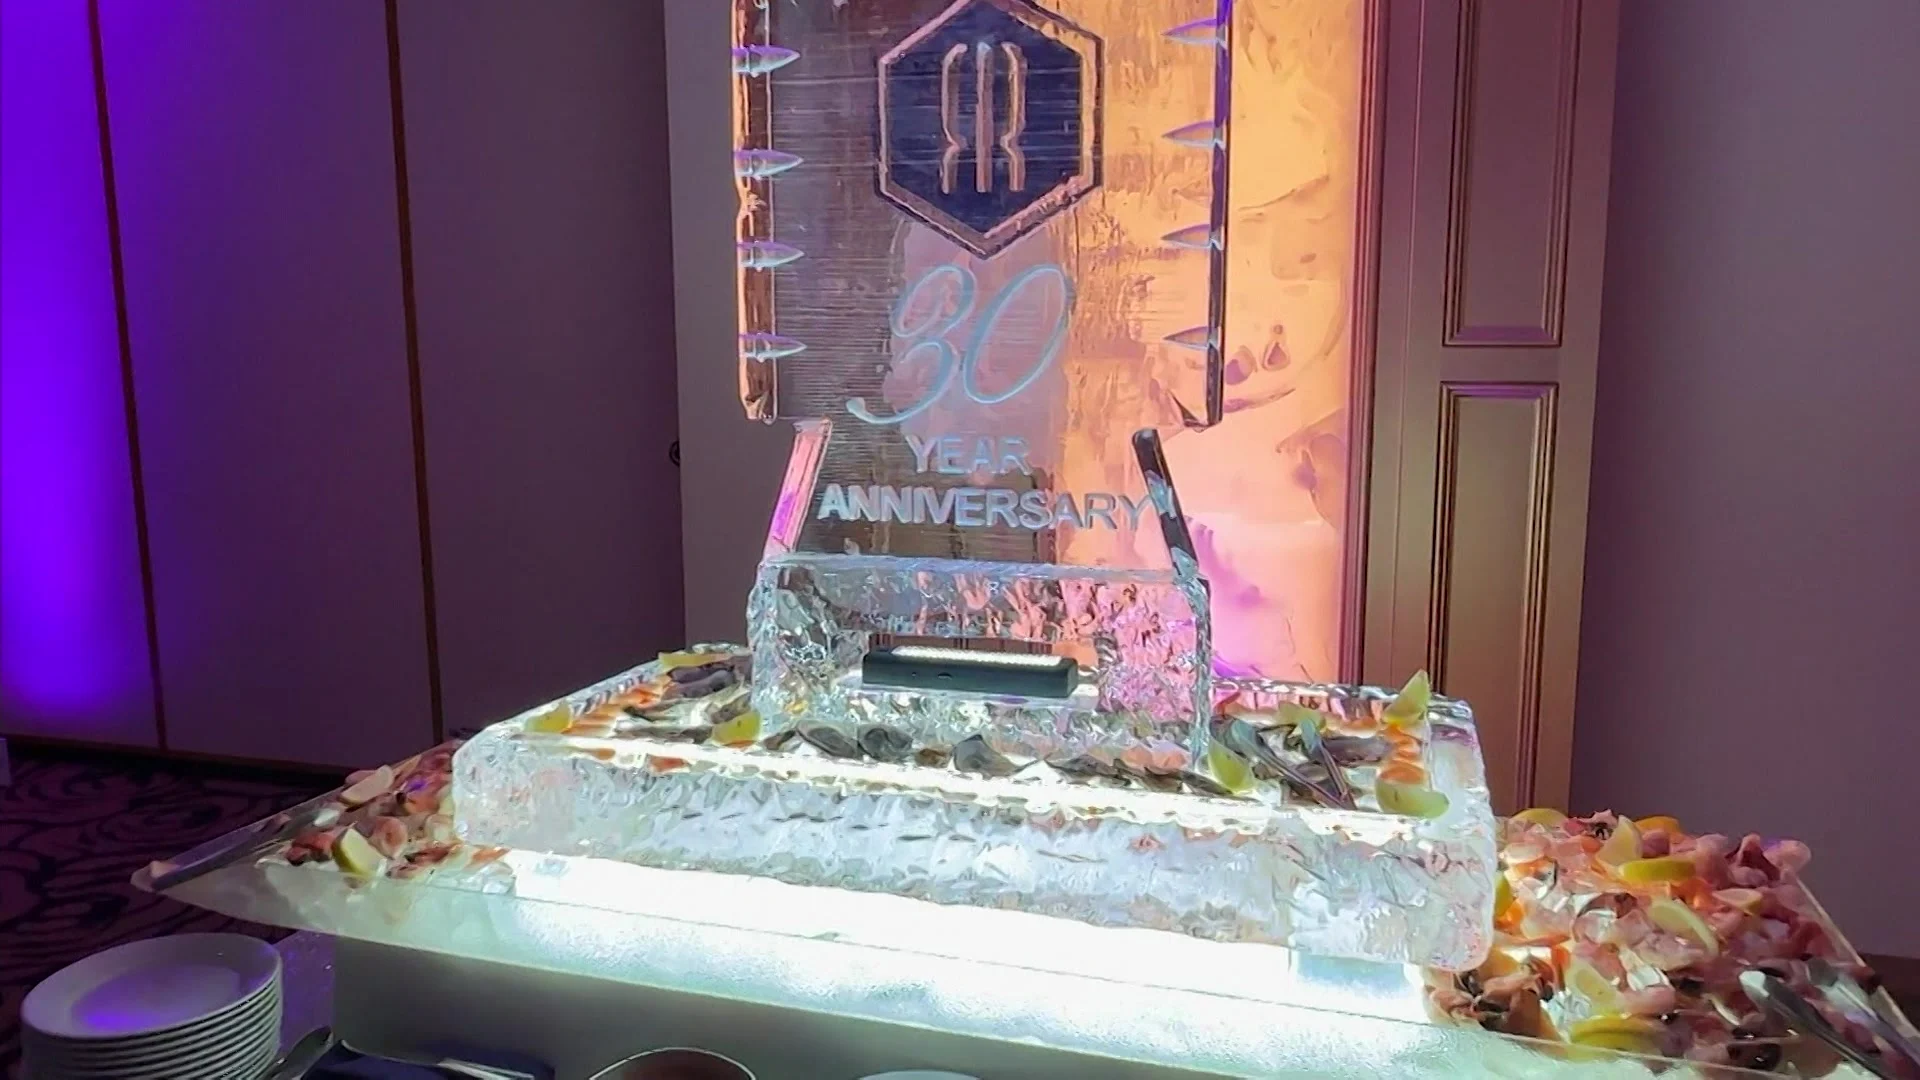 Royal Regency Hotel in Yonkers marks three decades of successful business operations